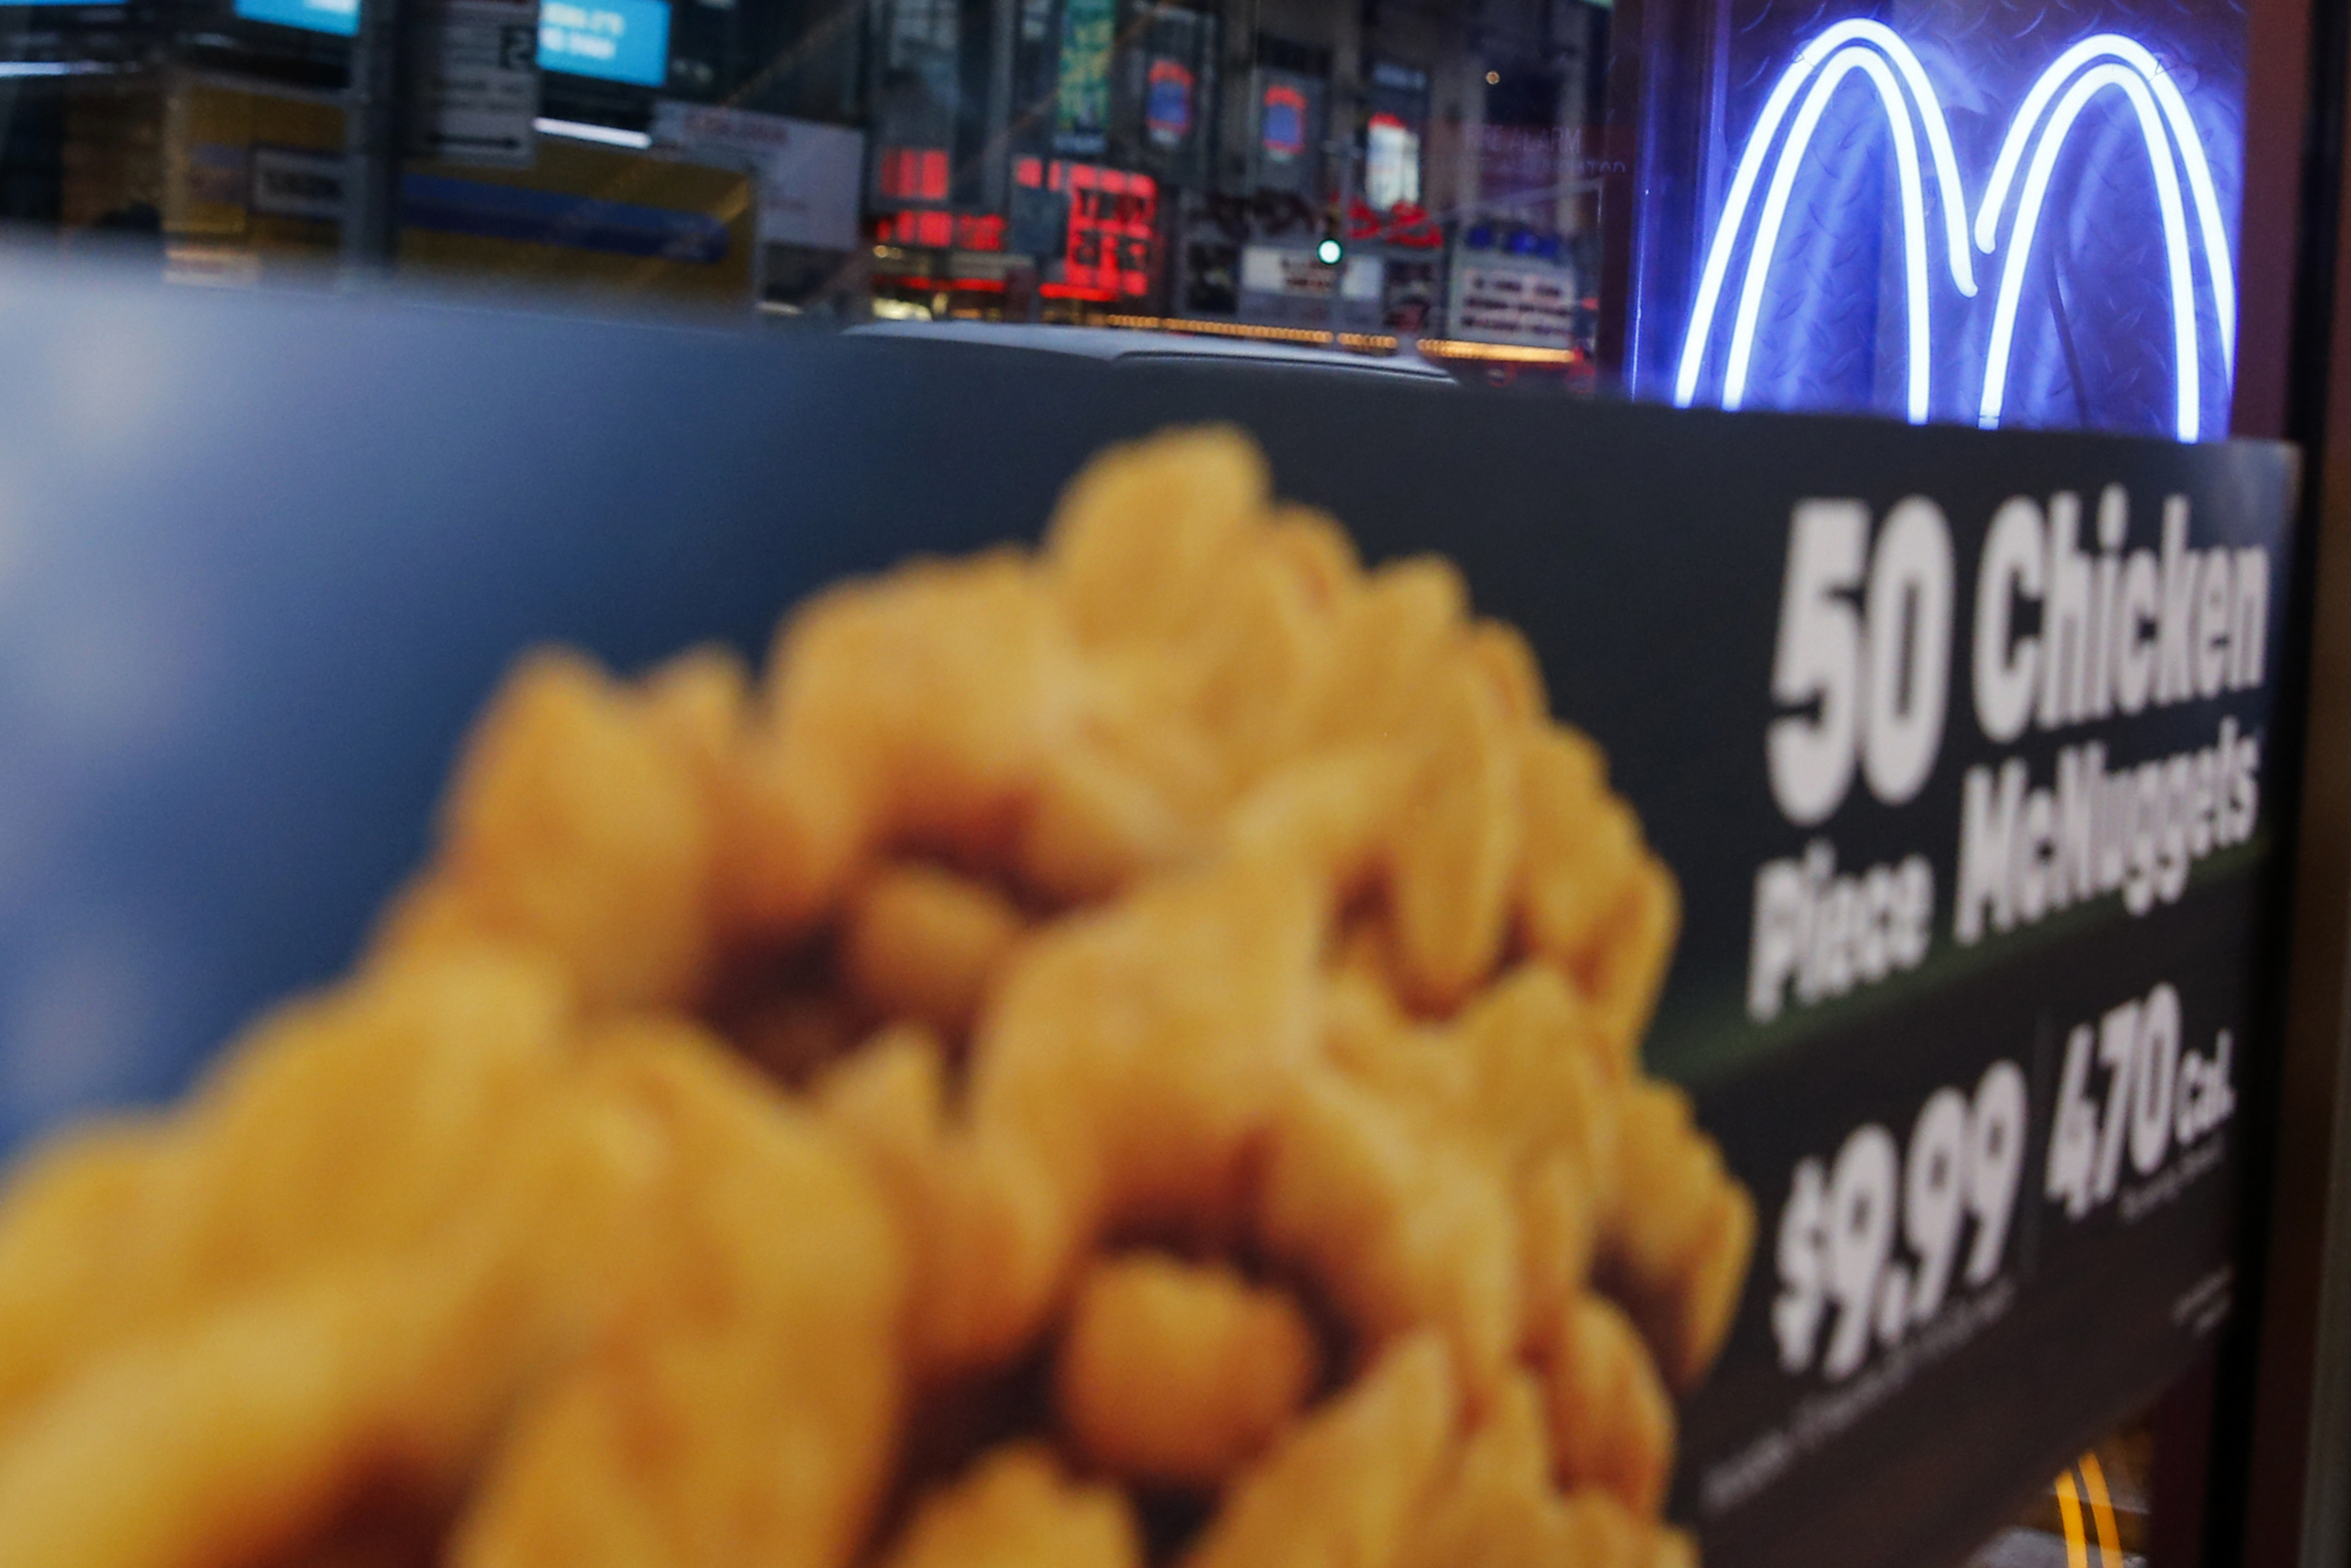 PHOTO: Neon McDonald's Golden Arches are seen at the Times Square location in New York City on Jan. 29, 2015.